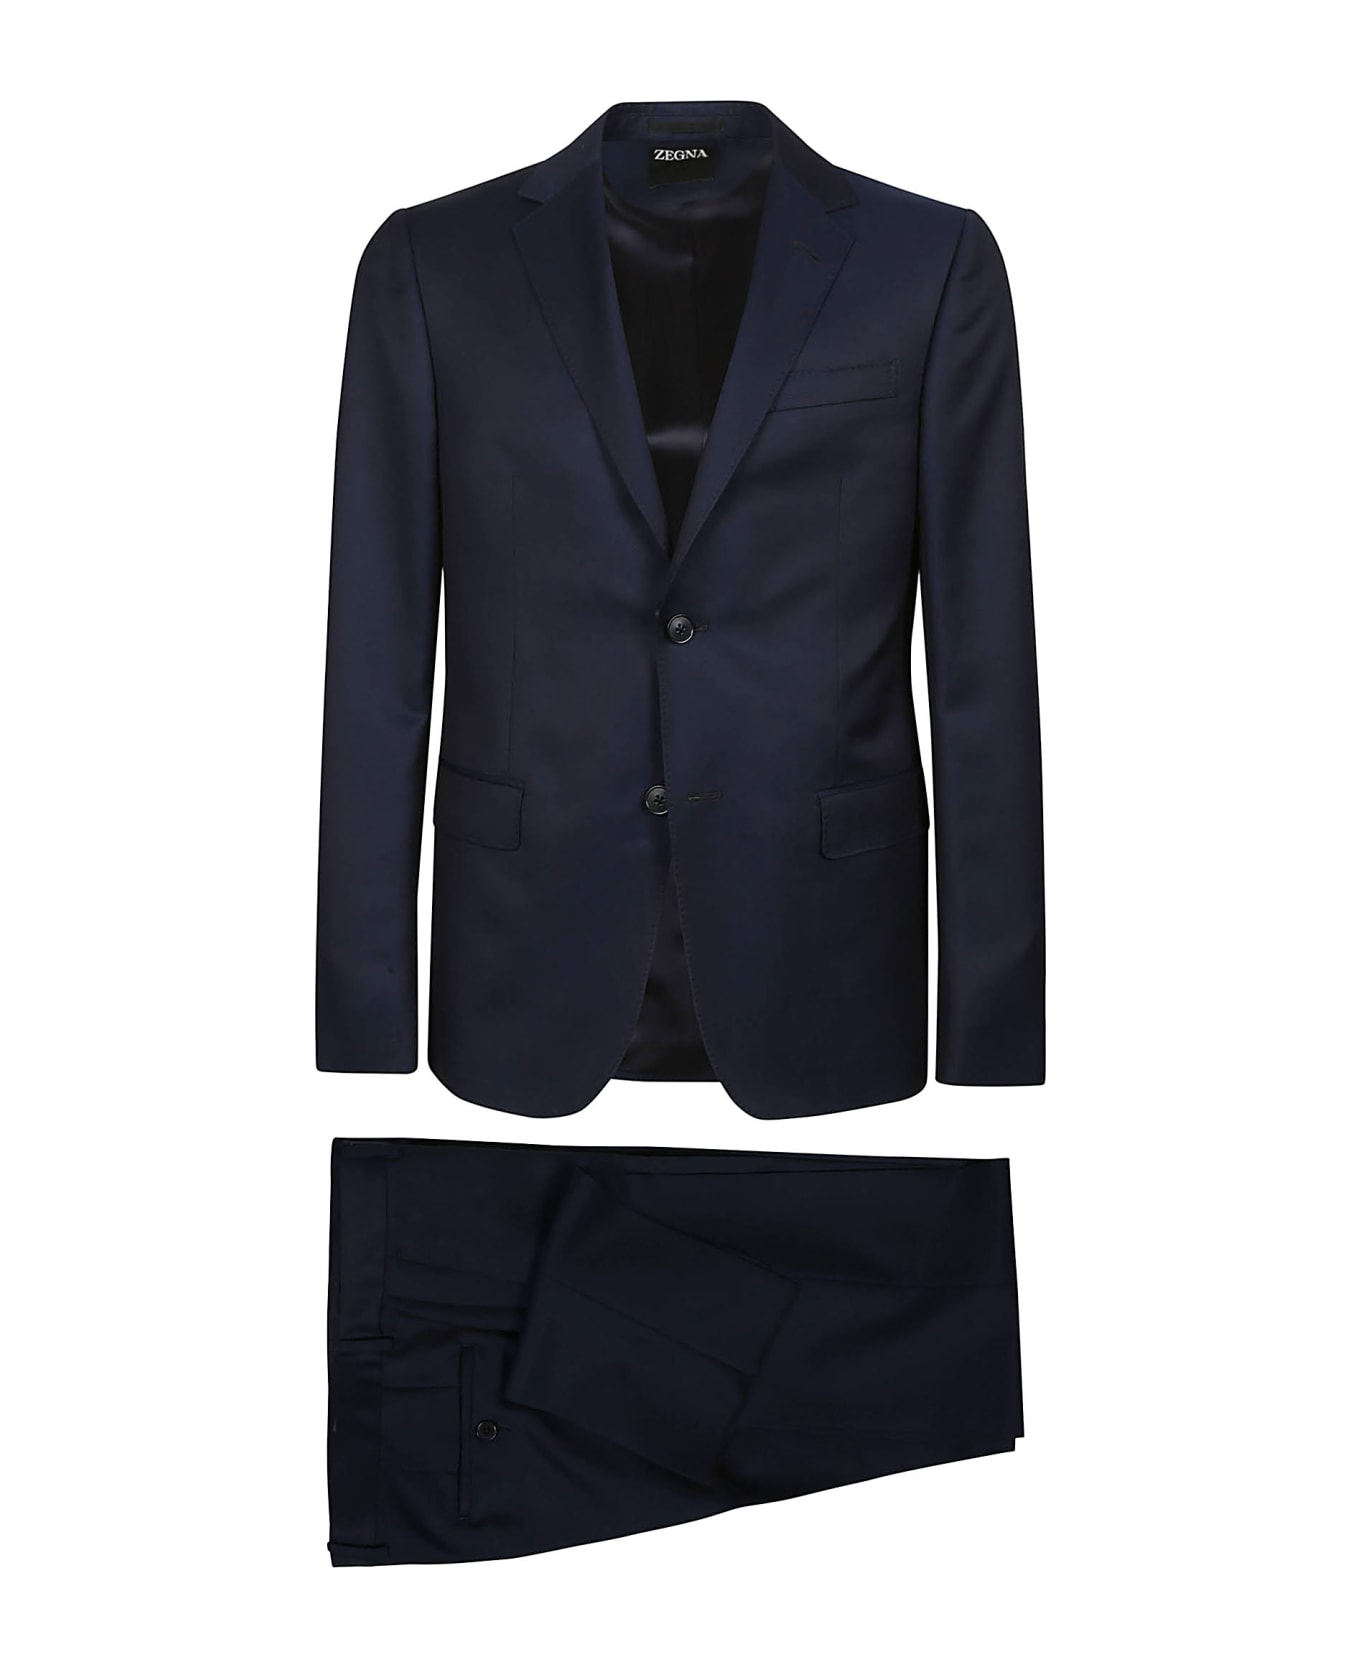 Zegna Lux Tailoring Suit - NAVY